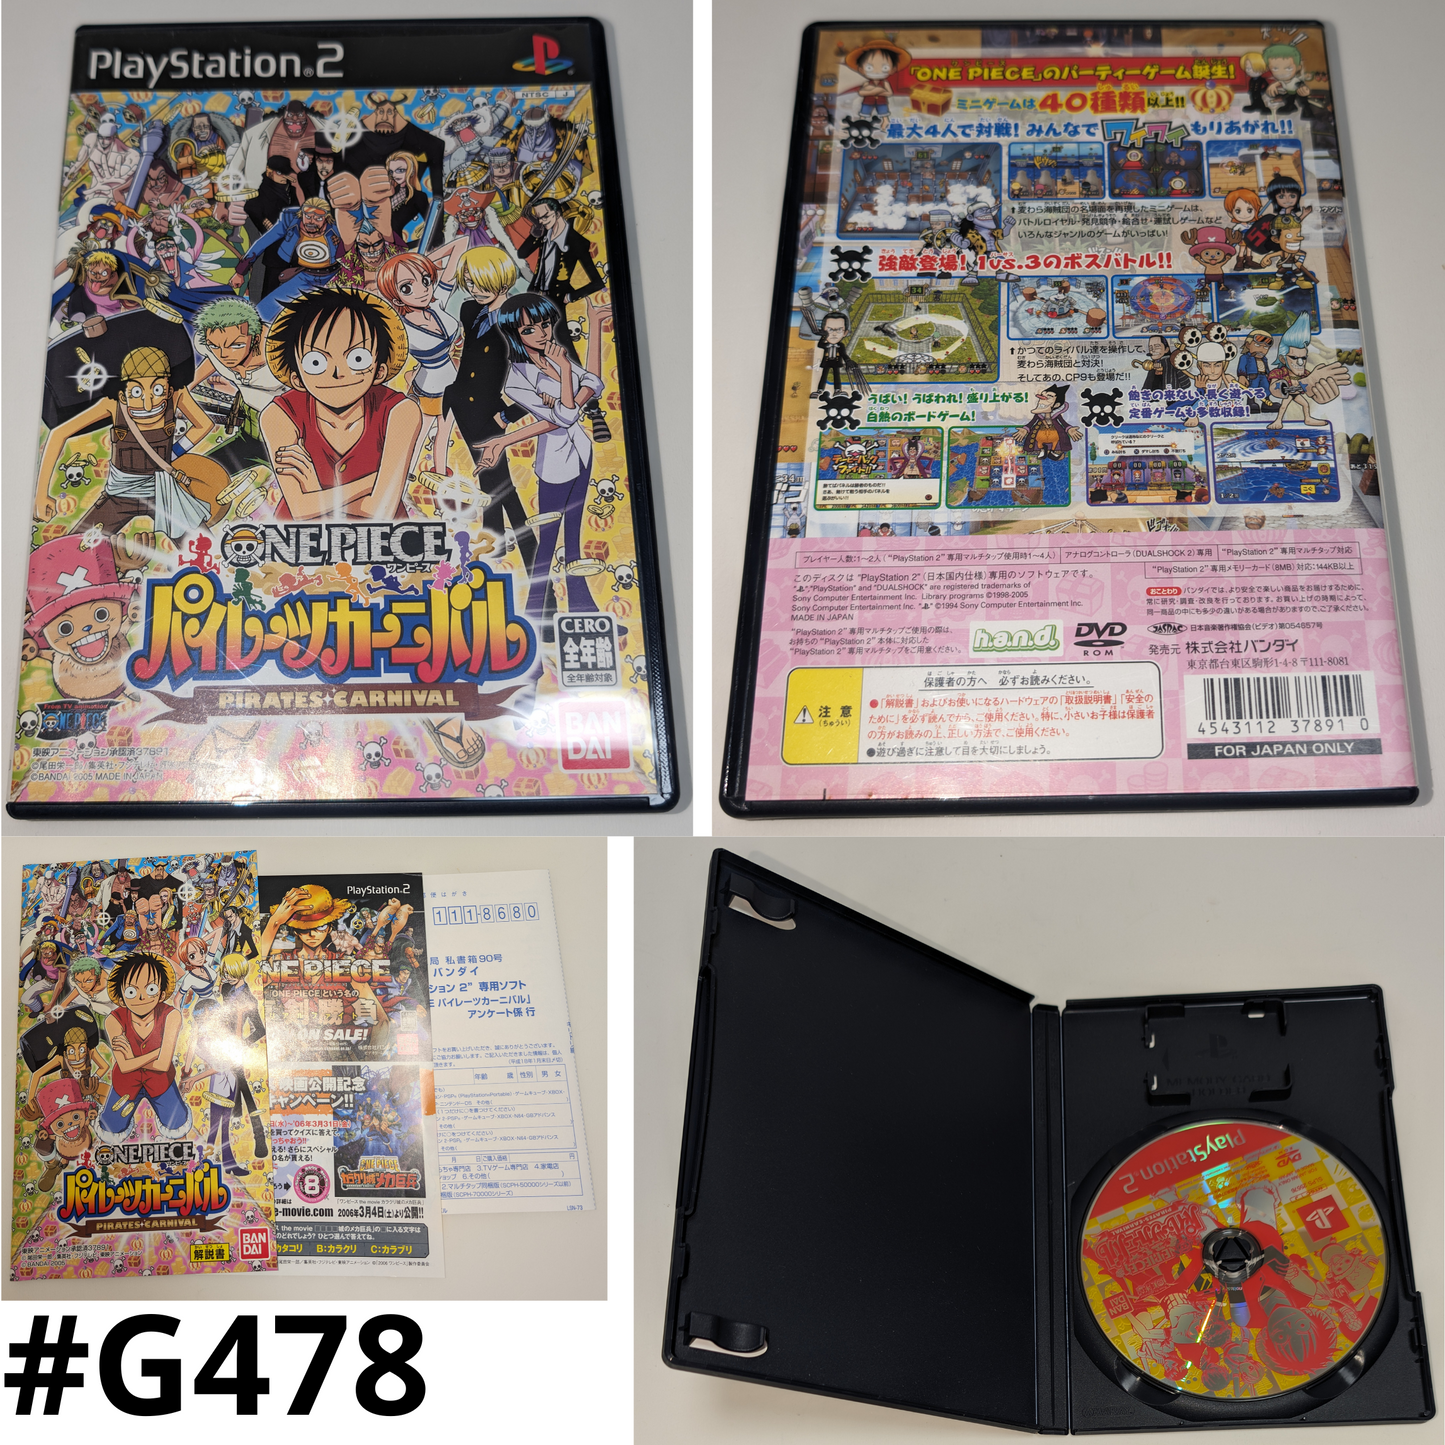 One Piece Pirates Carnival | PlayStation 2 | Japanese